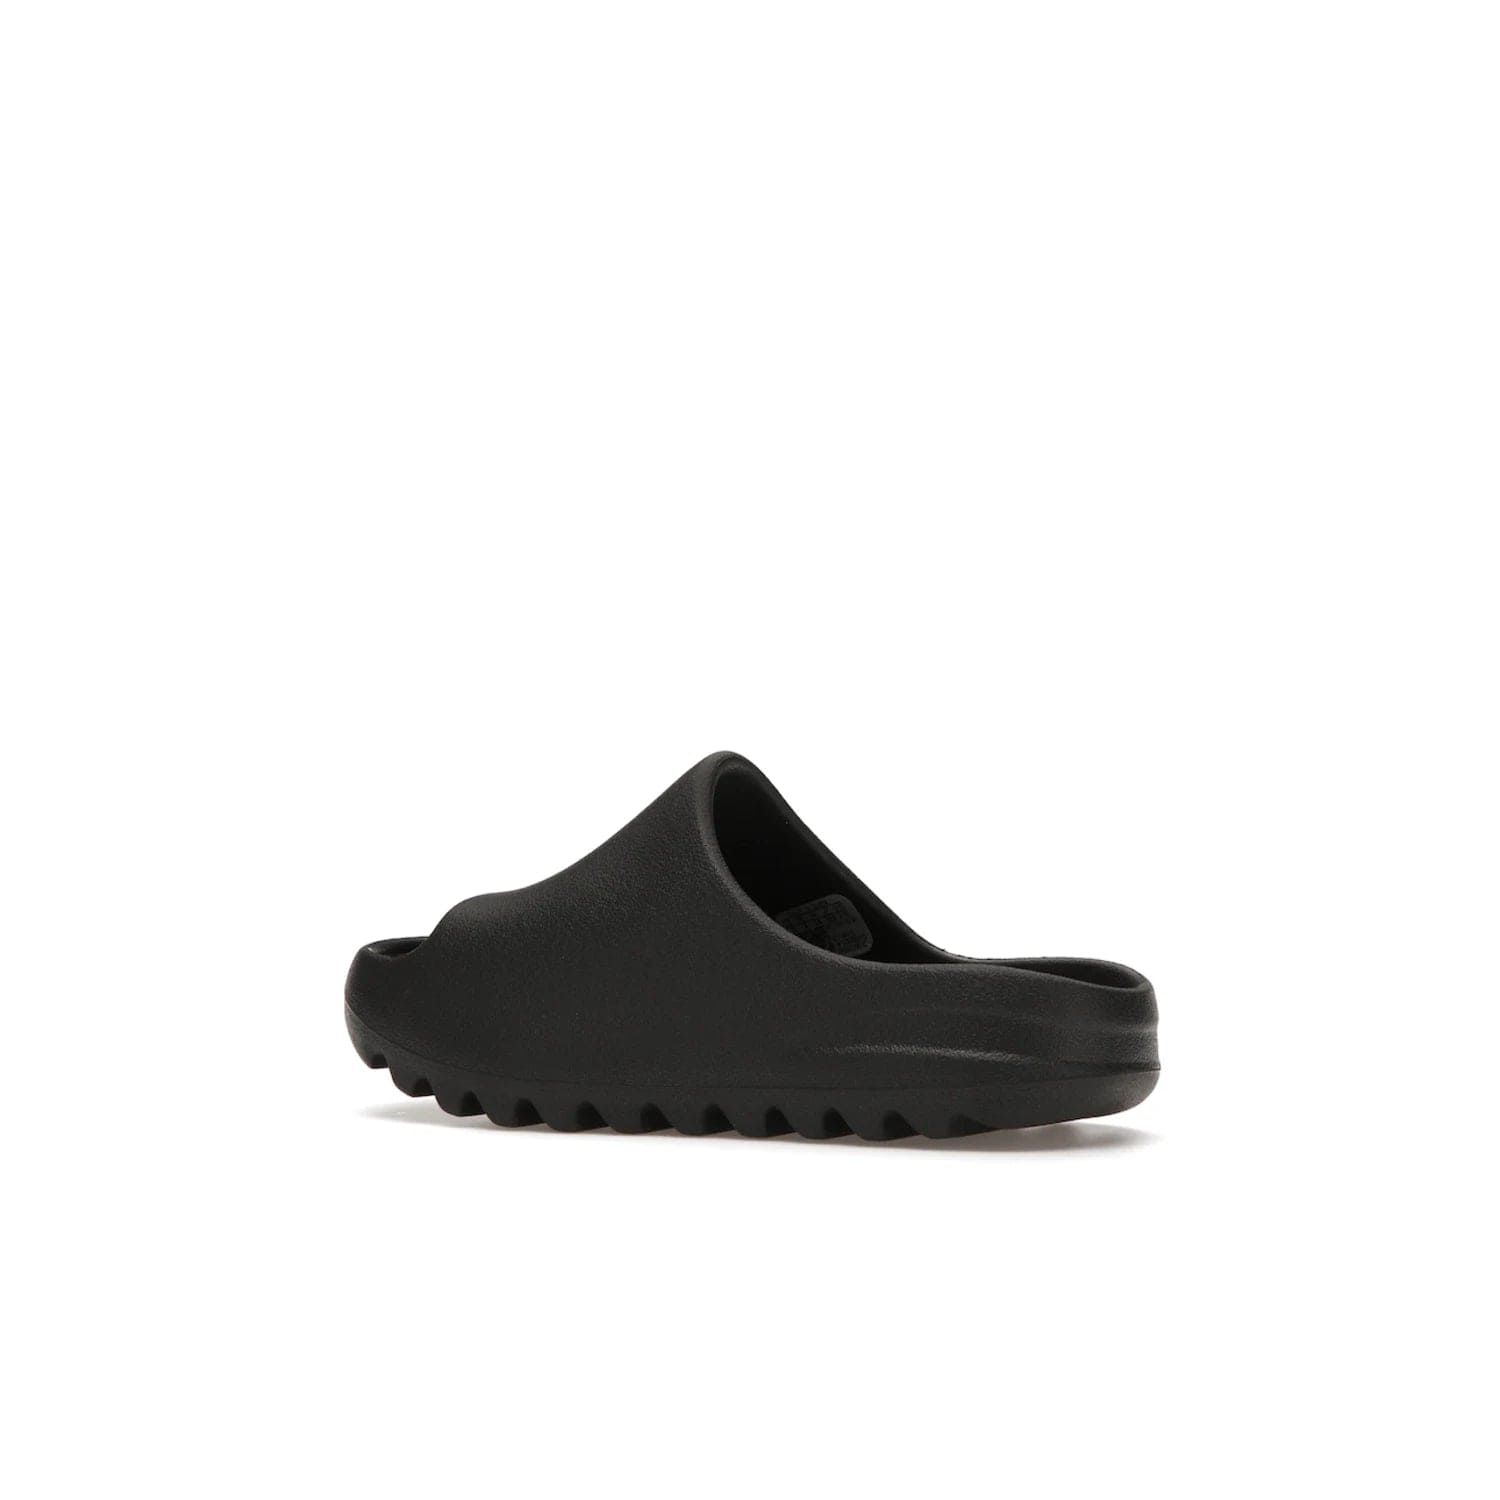 adidas Yeezy Slide Onyx (Kids) - Image 22 - Only at www.BallersClubKickz.com - adidas Yeezy Slide Onyx (Kids): Comfortable foam construction with textured surface and iconic three-stripe logo. Breathable, open-toe design and deep grooves for traction. Released in March 2021 at $50.